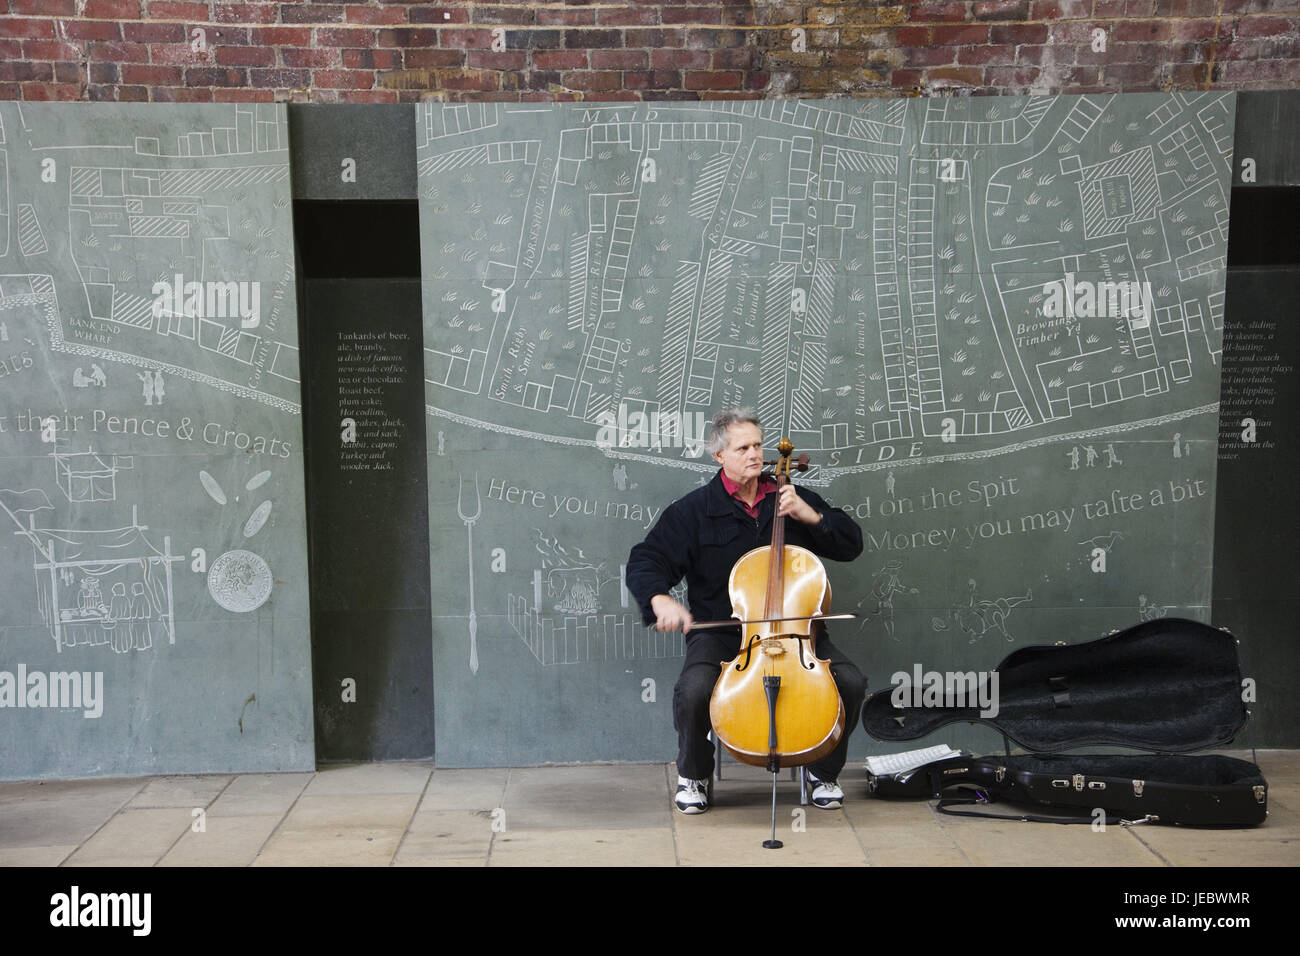 England, London, Southbank, street musician, UK, GB, Bankside, street, music, musician, person, man, cello, musical instrument, defensive wall, brick defensive wall, brick, hobby, leisure time, Stock Photo